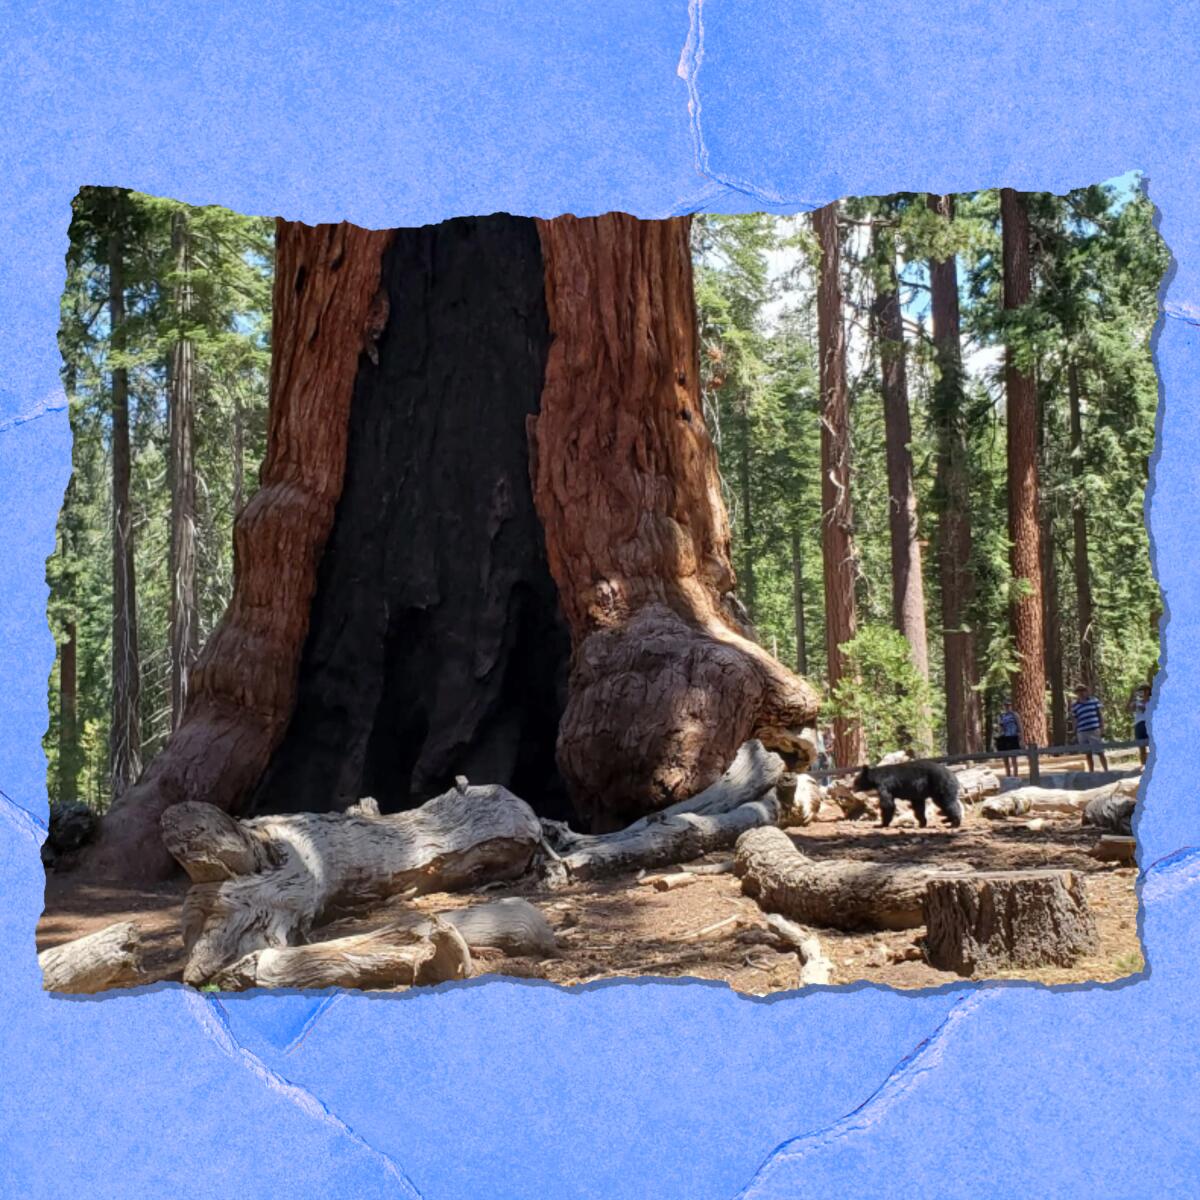 A brown bear is dwarfed by a huge tree in a forest. In the background are two people.